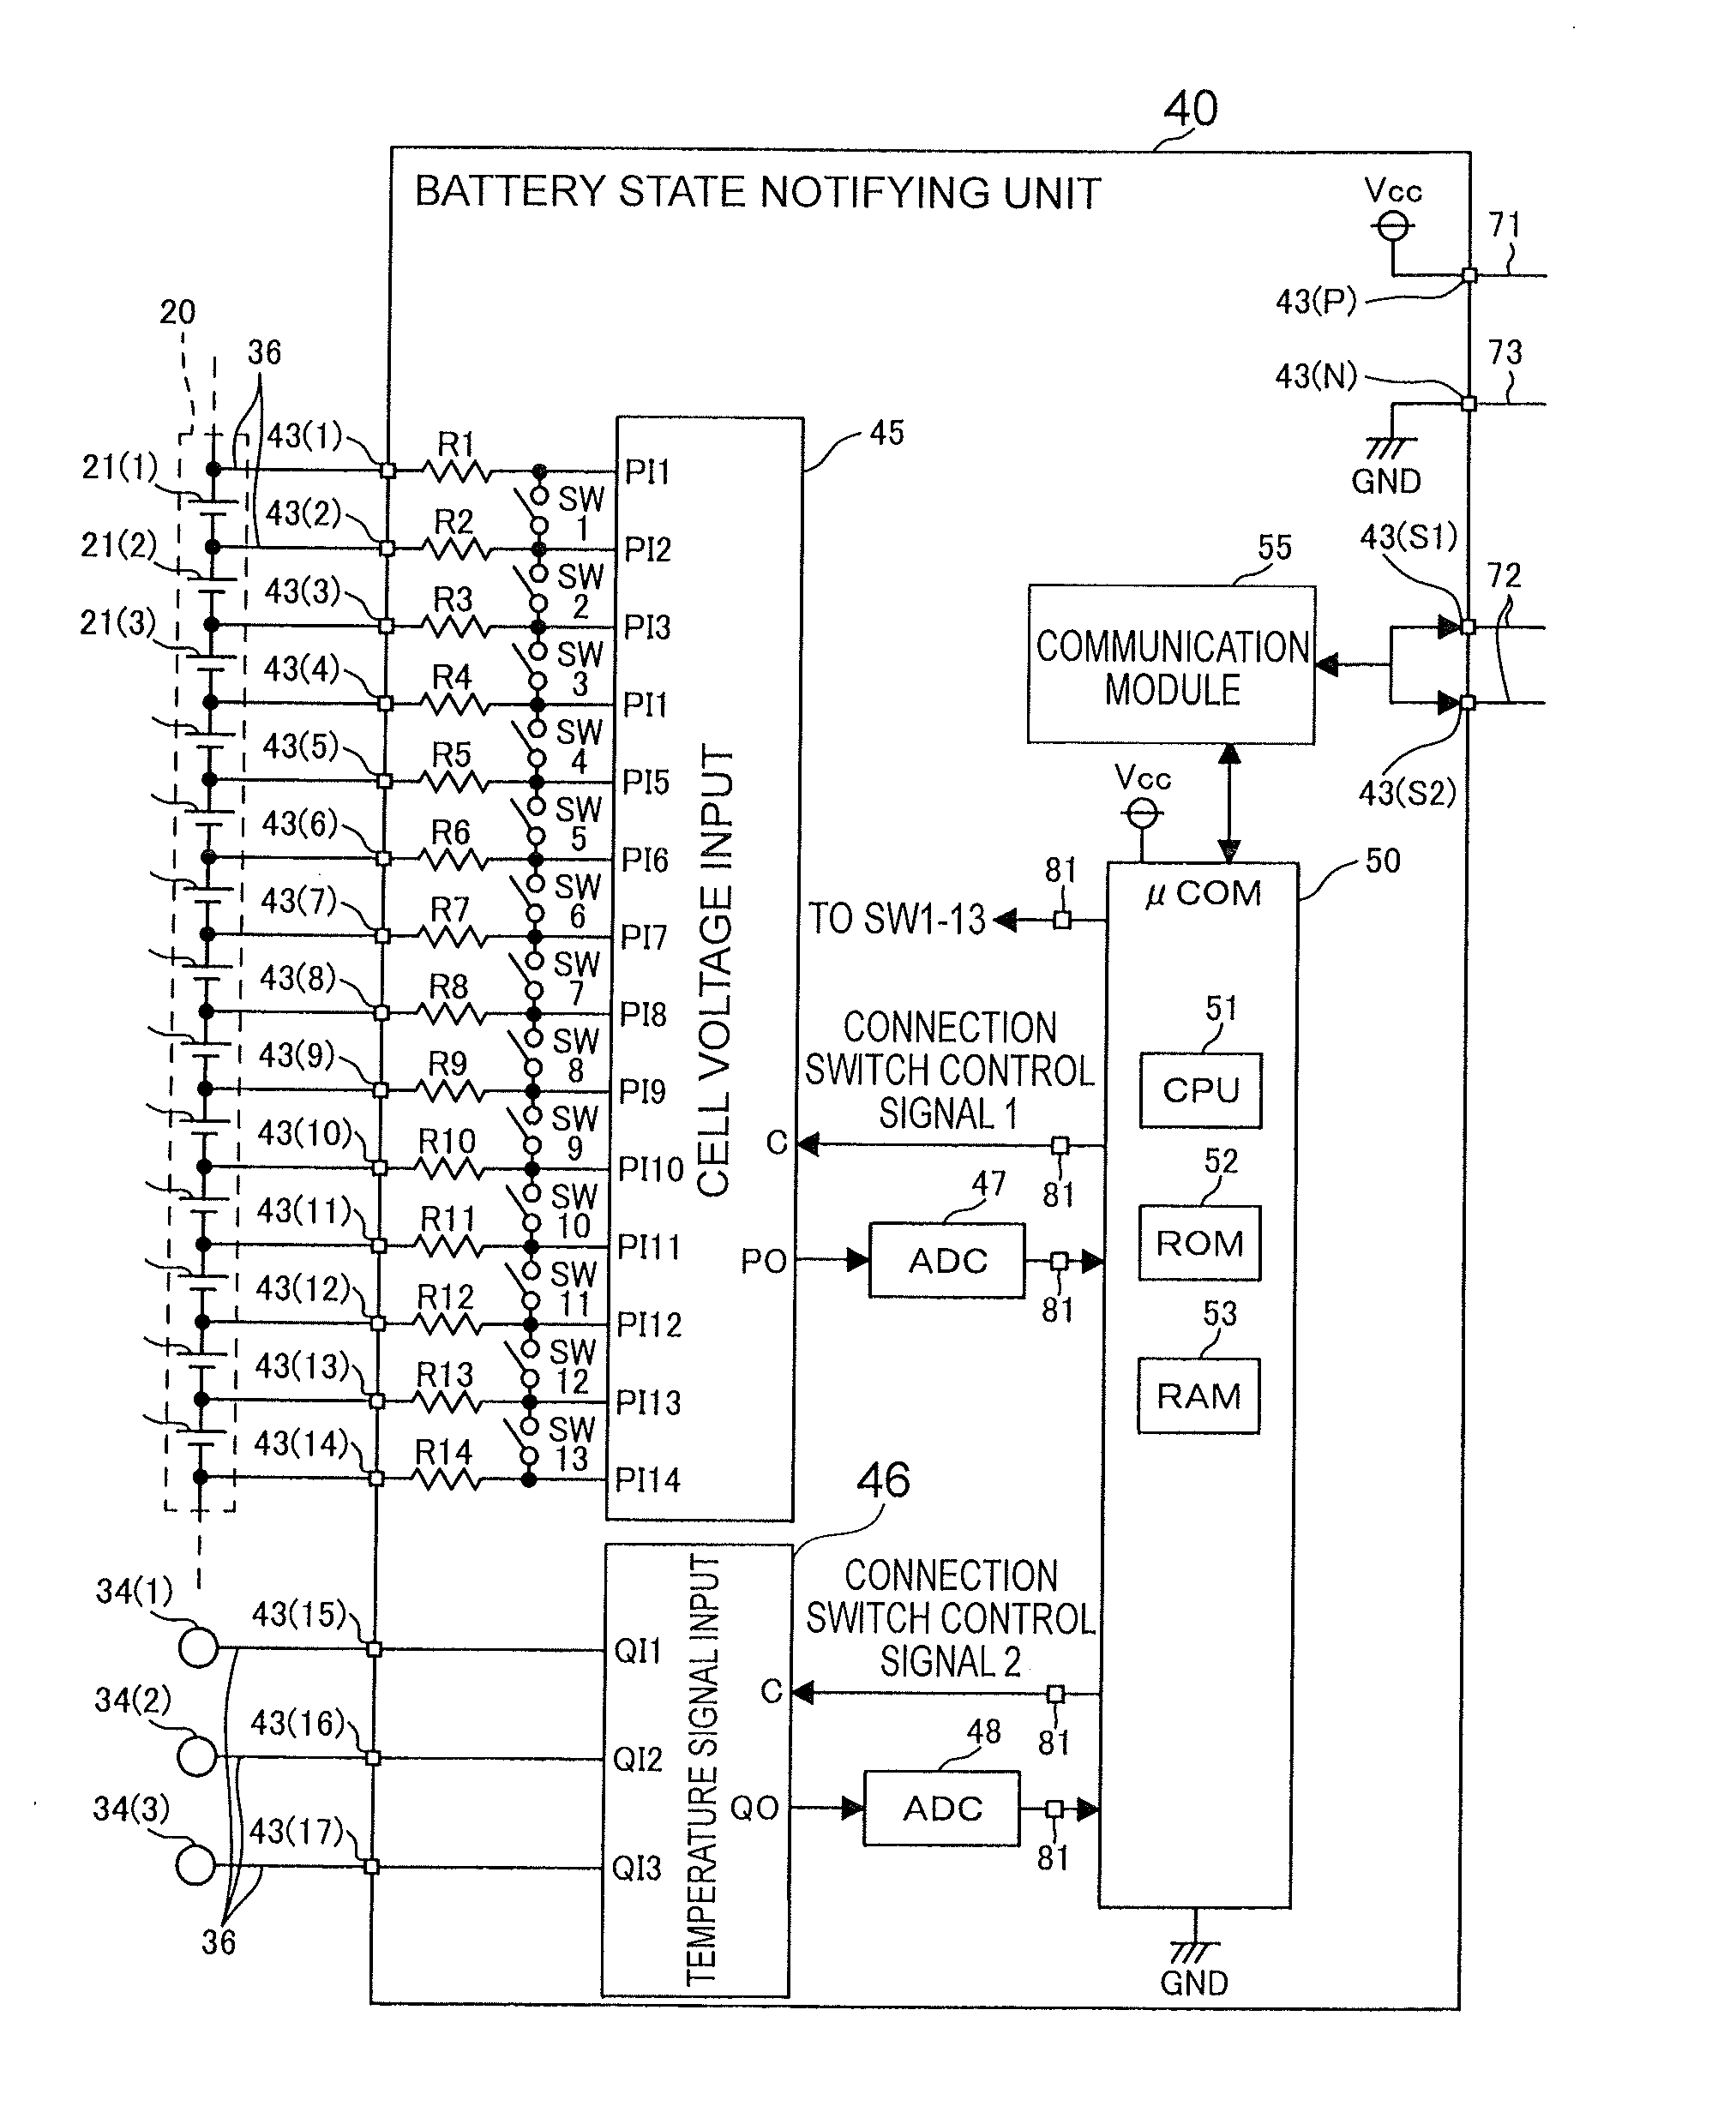 Battery state notifying unit, bus bar module, battery pack, and battery state monitoring system